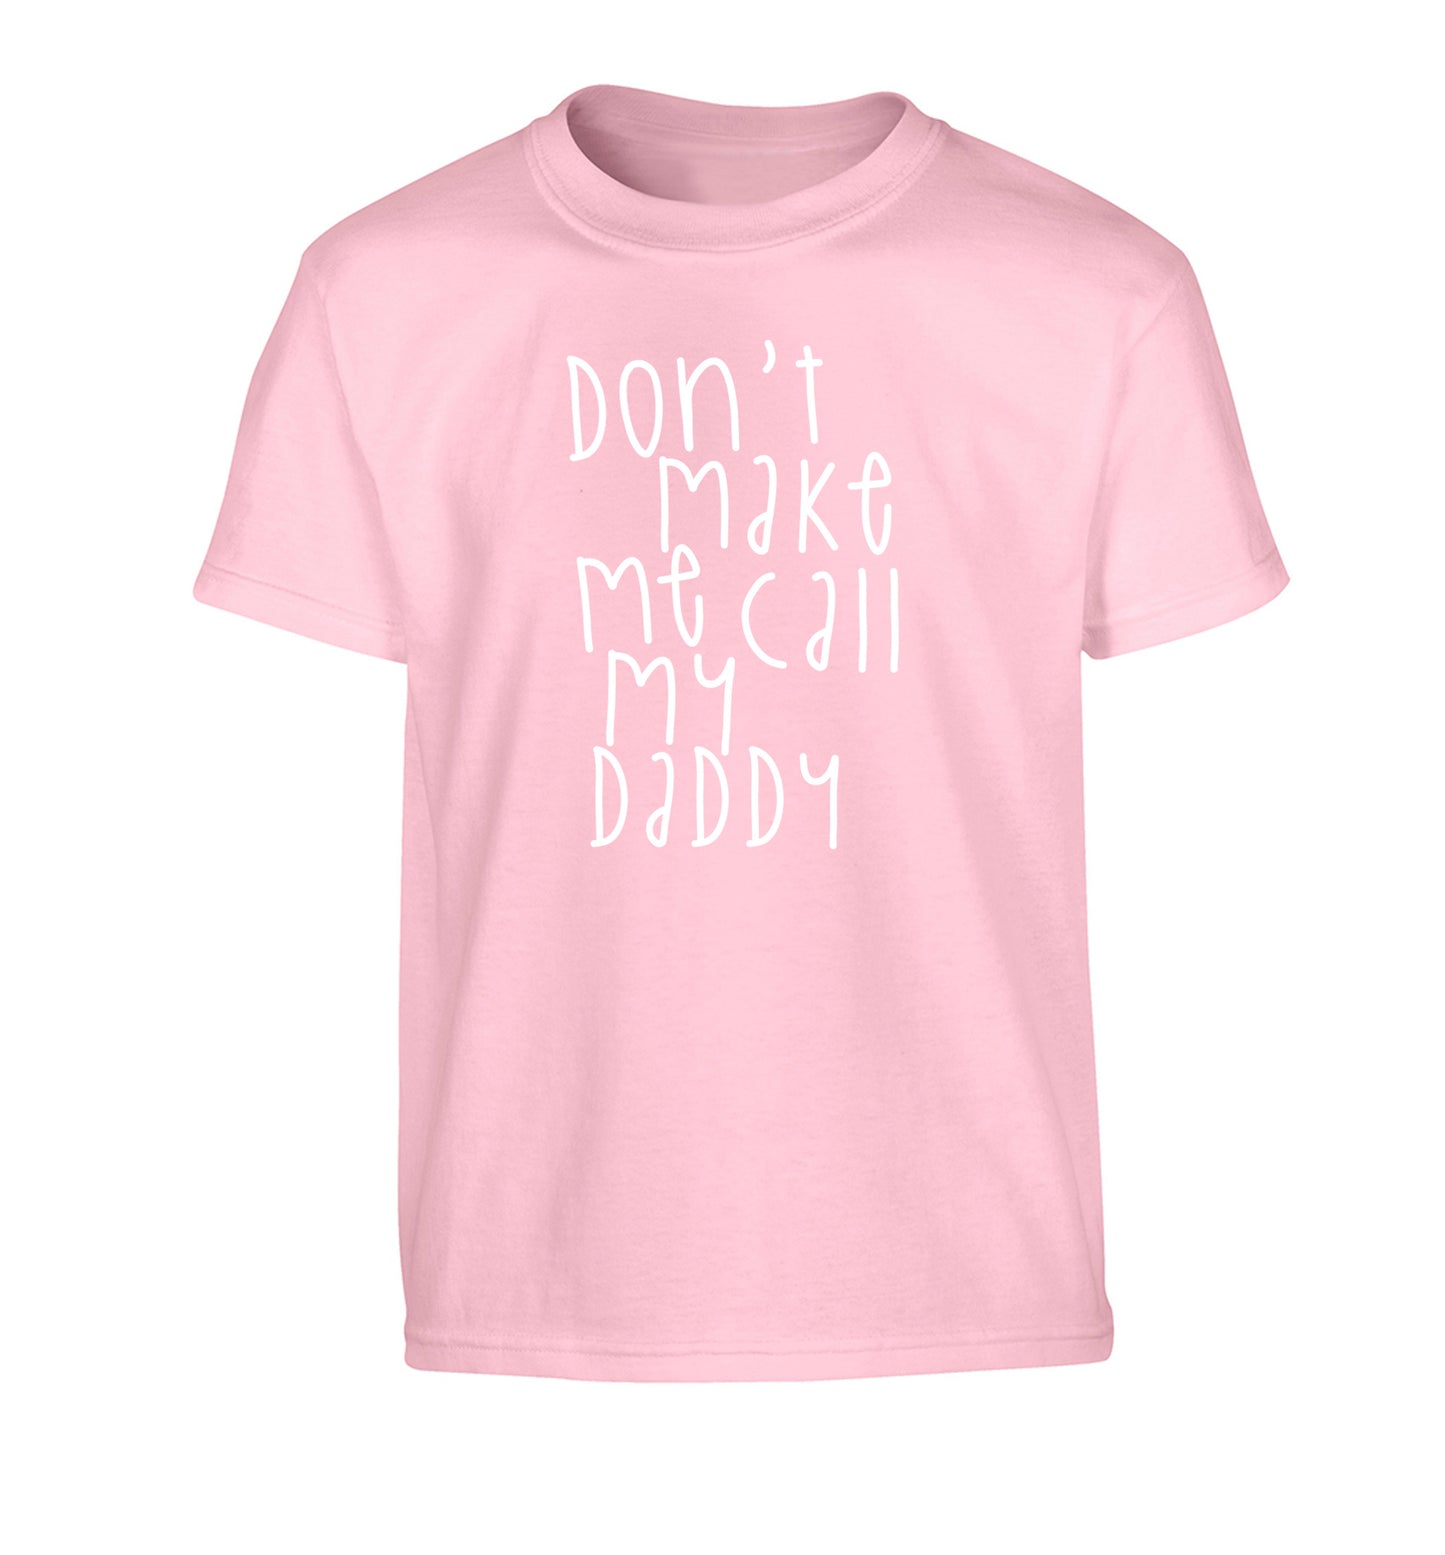 Don't make me call my daddy Children's light pink Tshirt 12-14 Years